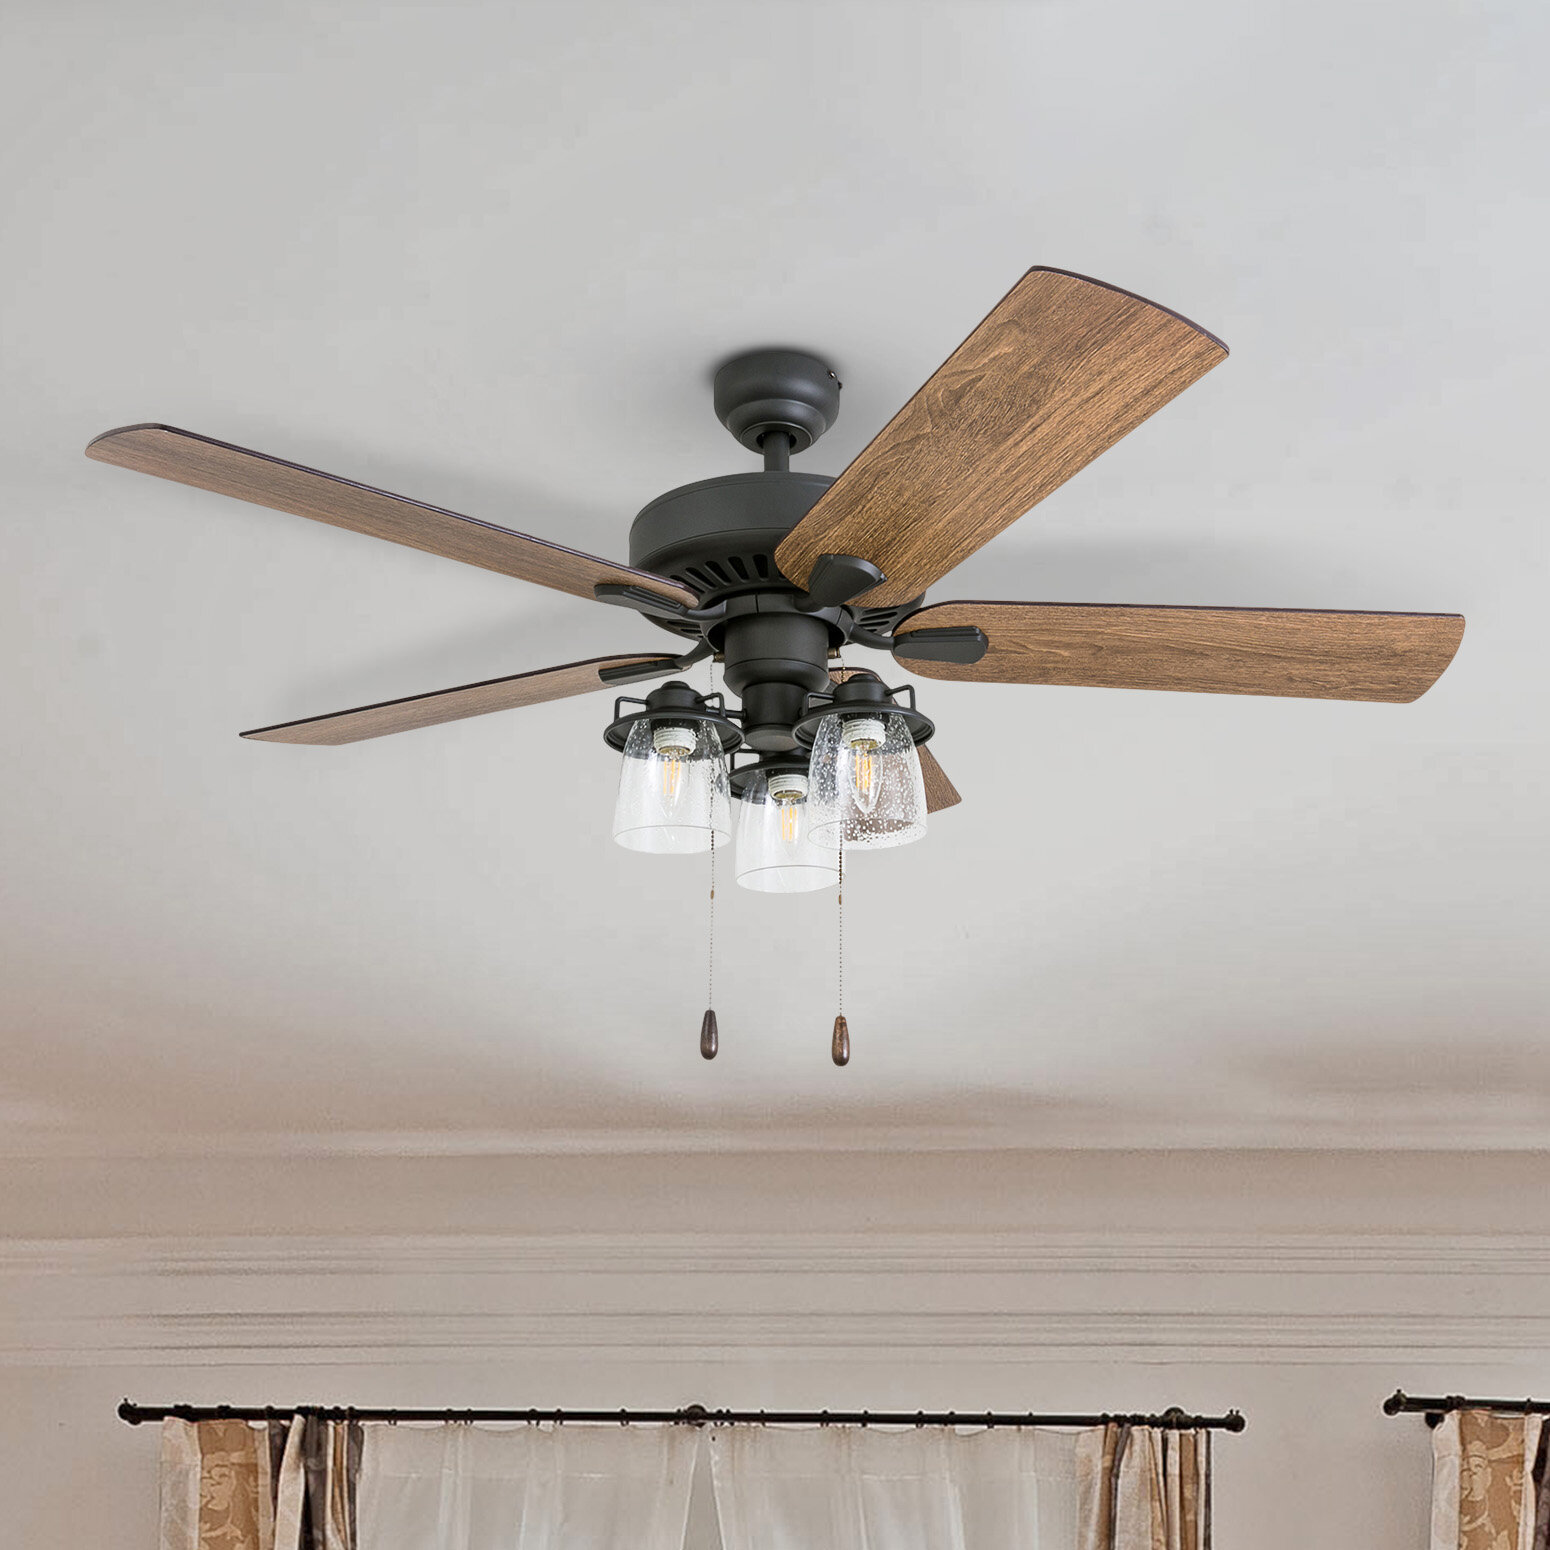 Three Posts 52 Alexa 5 Blade Standard Ceiling Fan With And Light Kit Included Reviews Wayfair